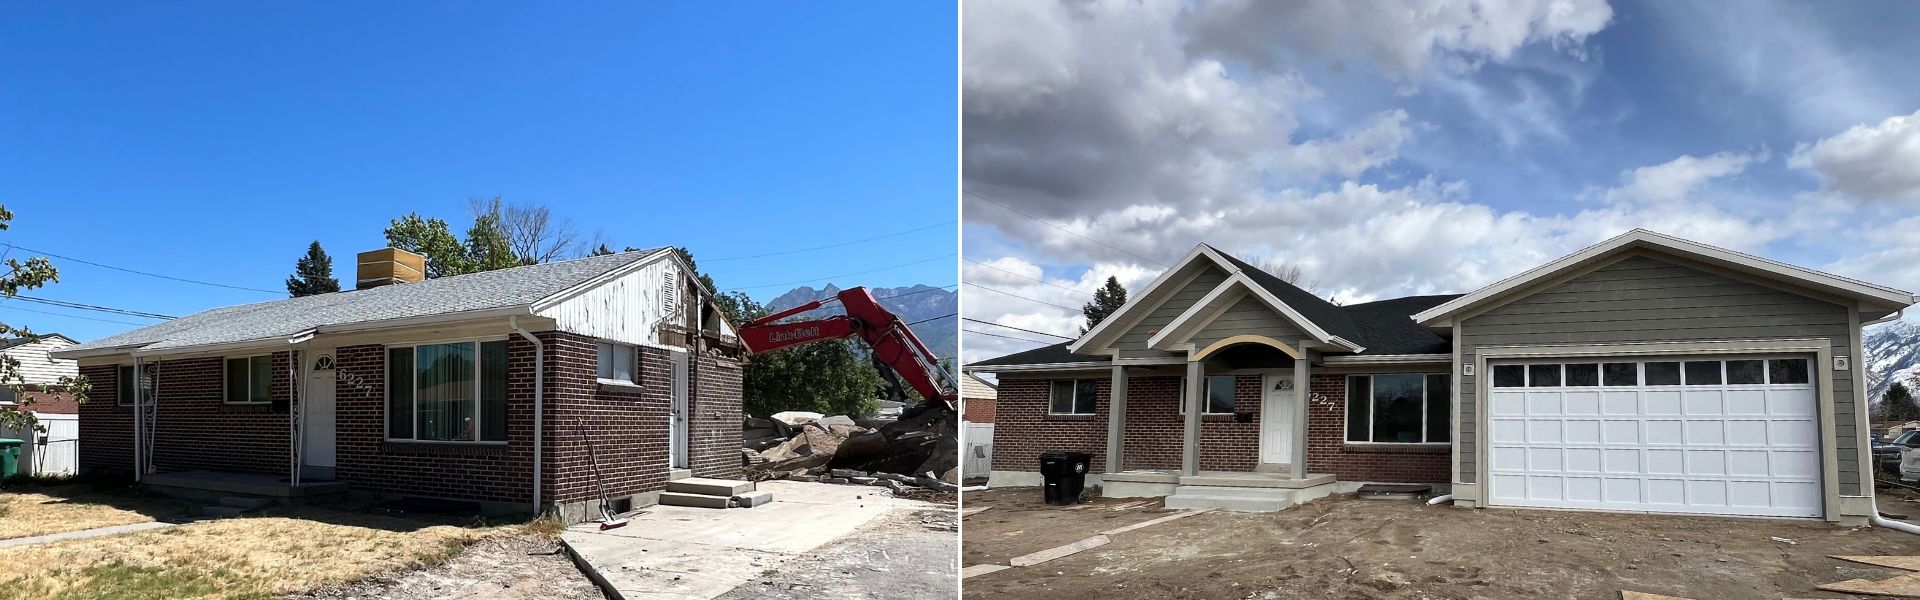 Kelly Home Addition Renovations in Murray Utah Before After Banner